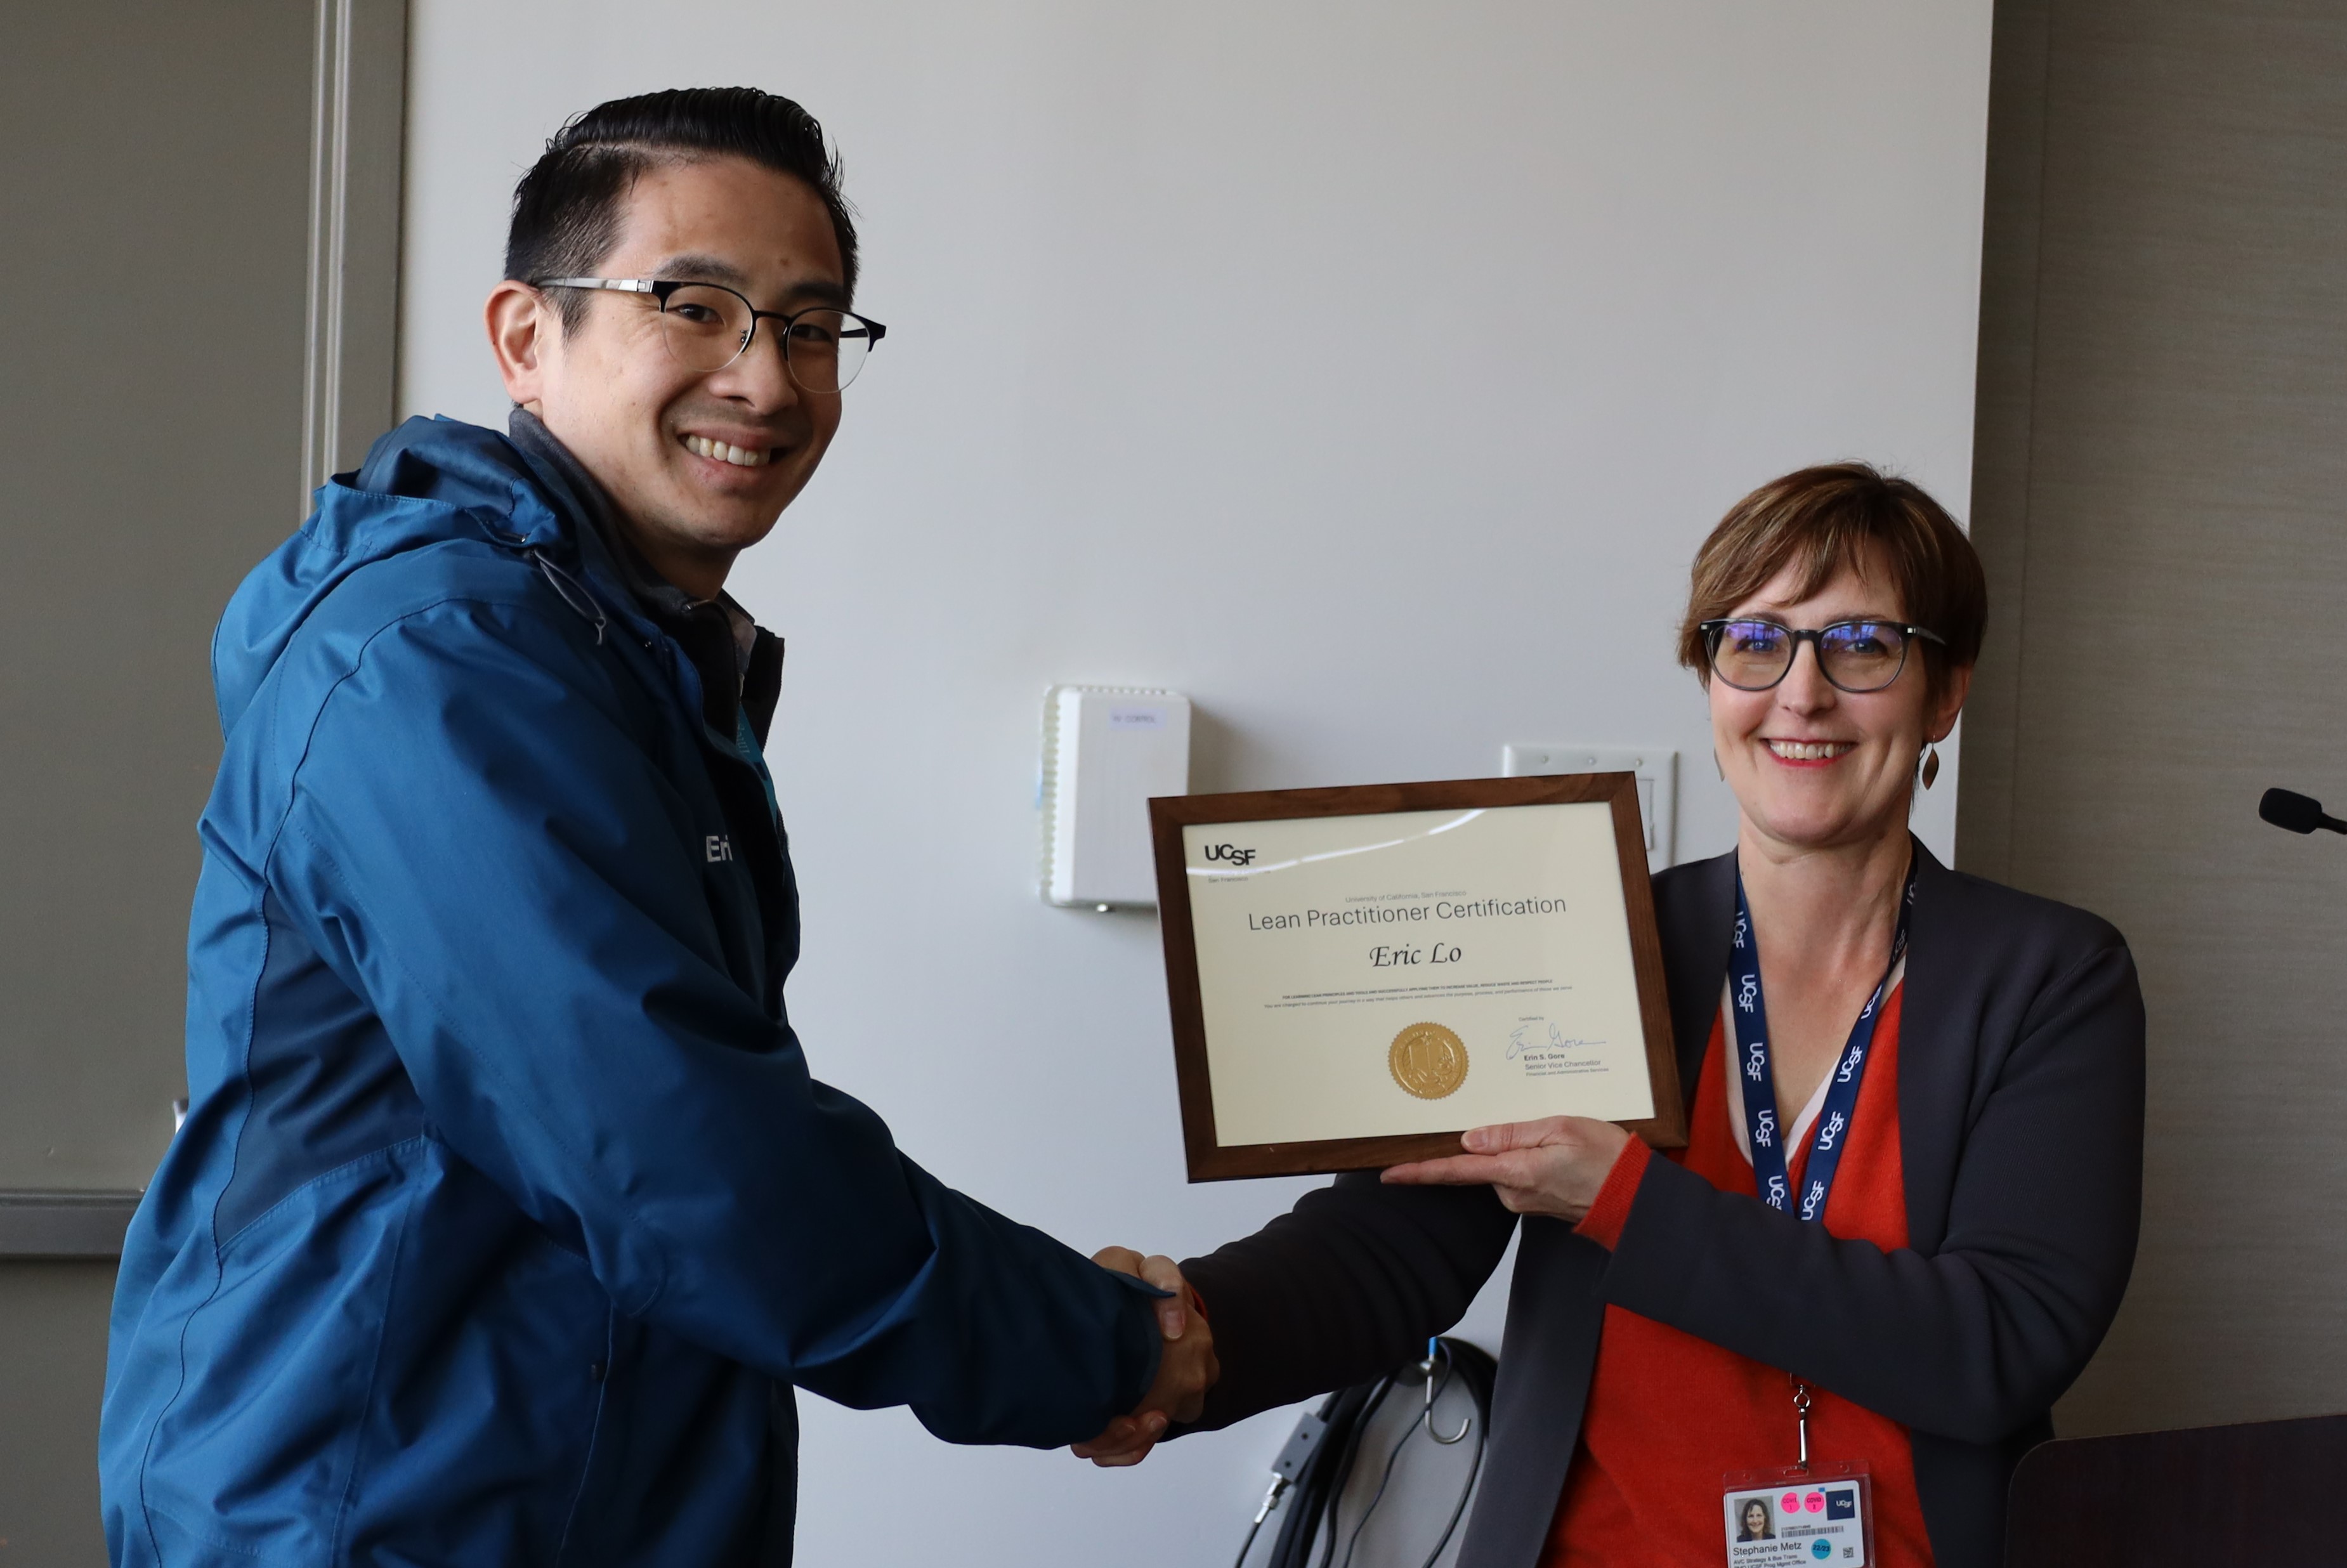 Eric Lo receiving his Lean Practitioner Certificate from Stephanie Metz for his project "Service Level Agreements"